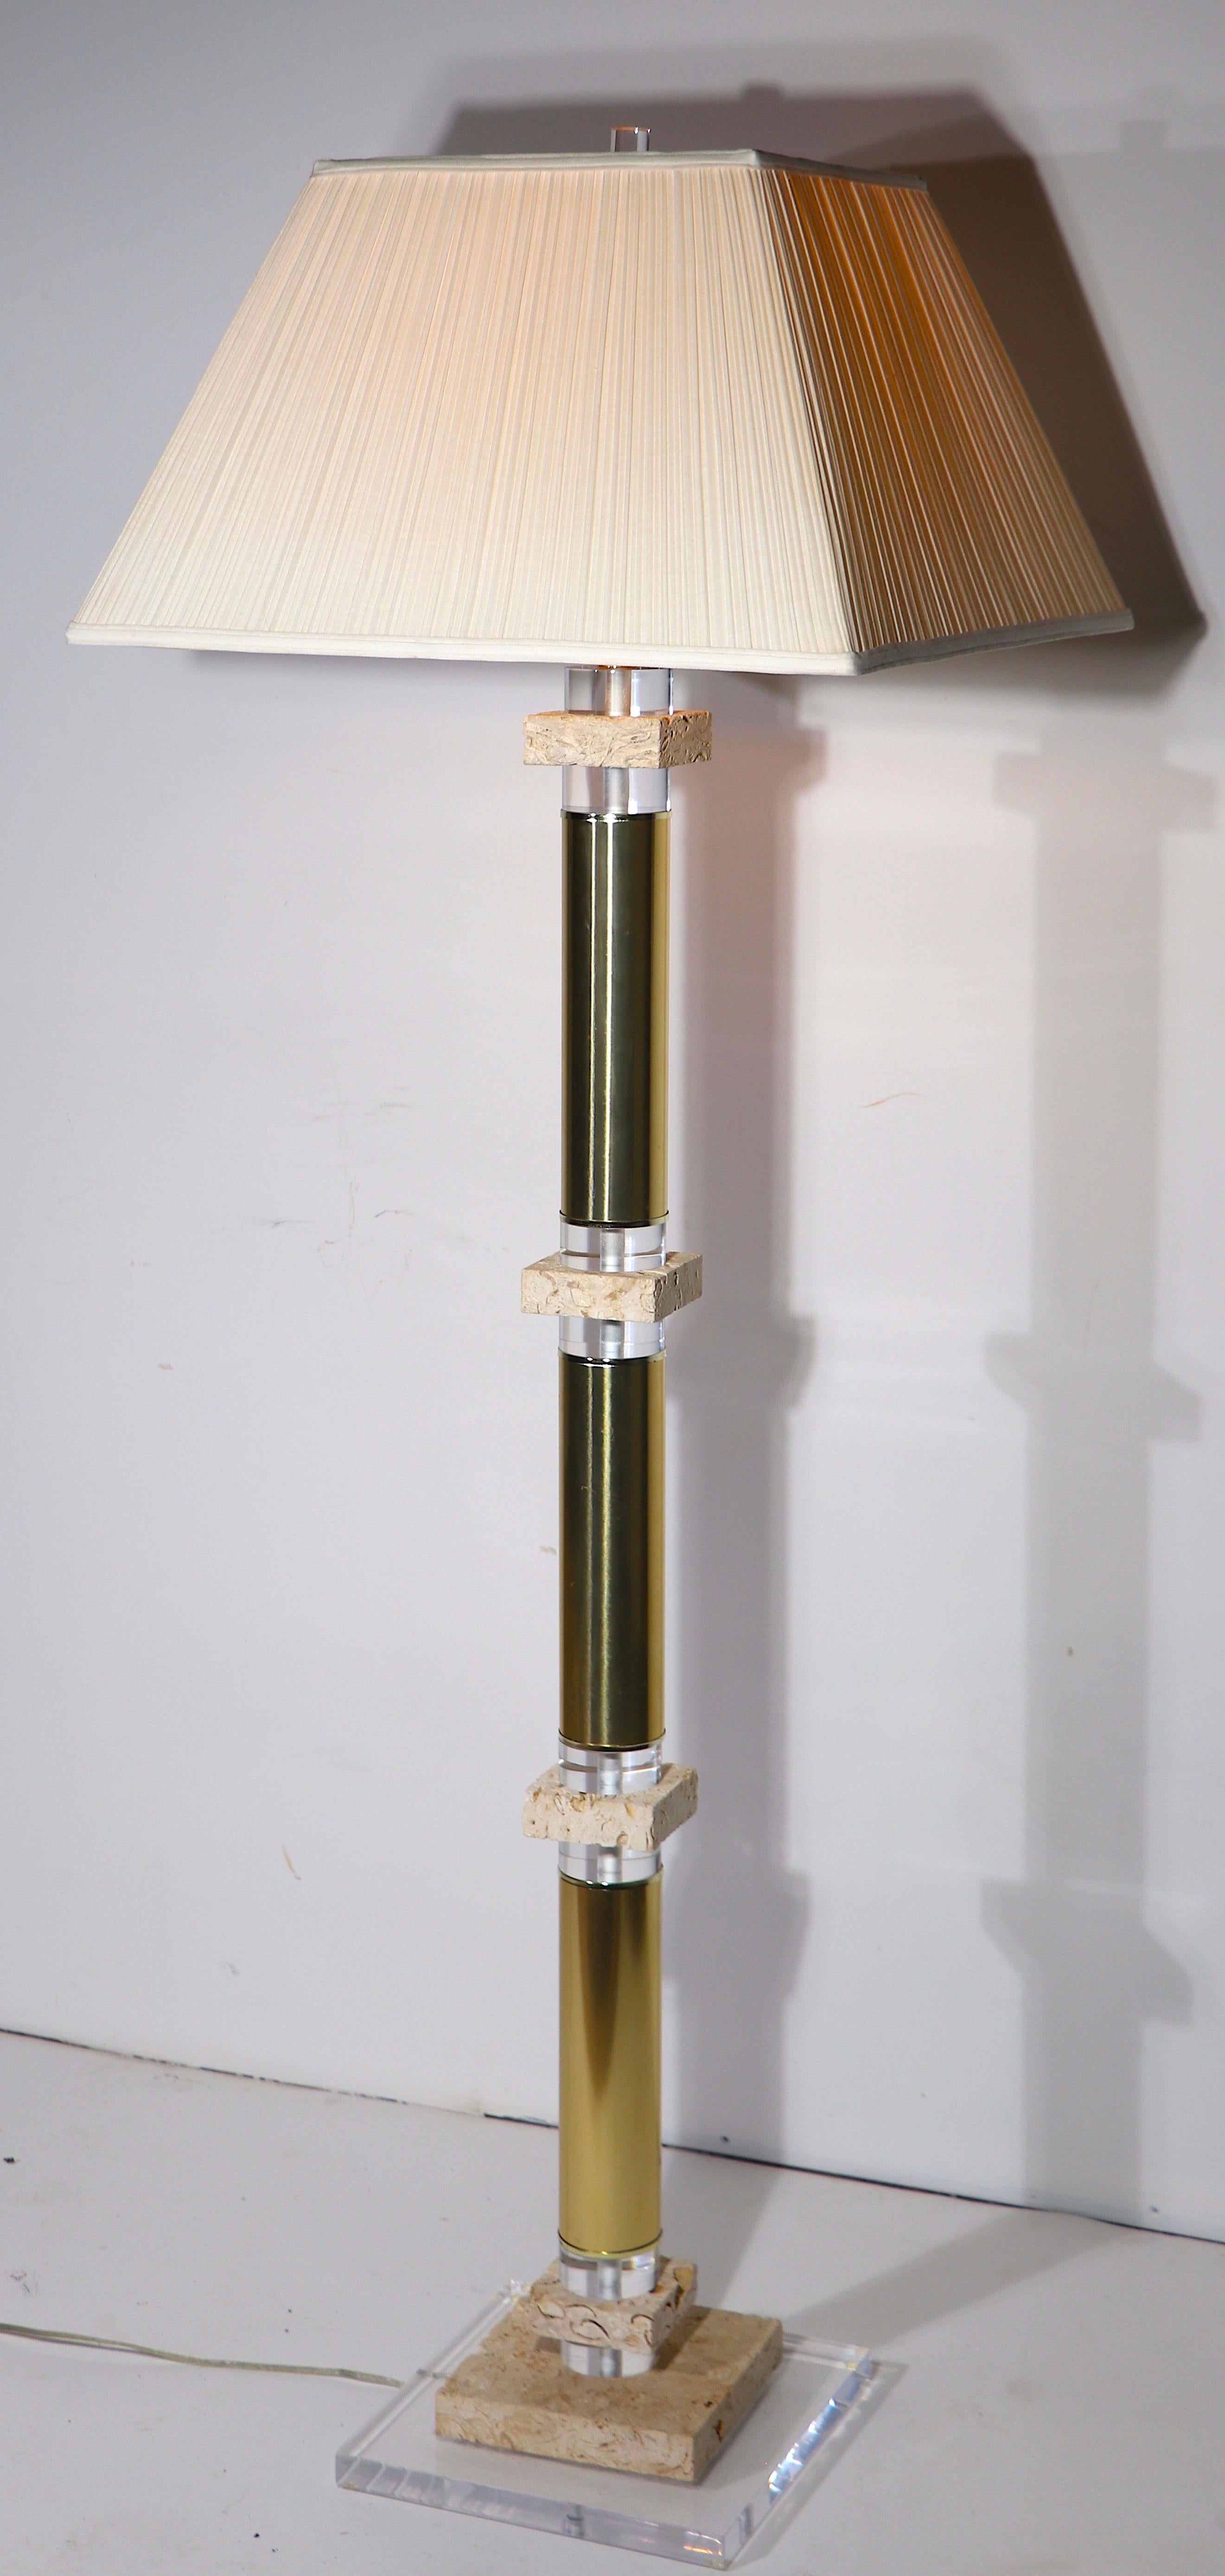 20th Century Hollywood Regency Lucite Brass Fossilized Stone  Floor Lamp c. 1970/1980's For Sale